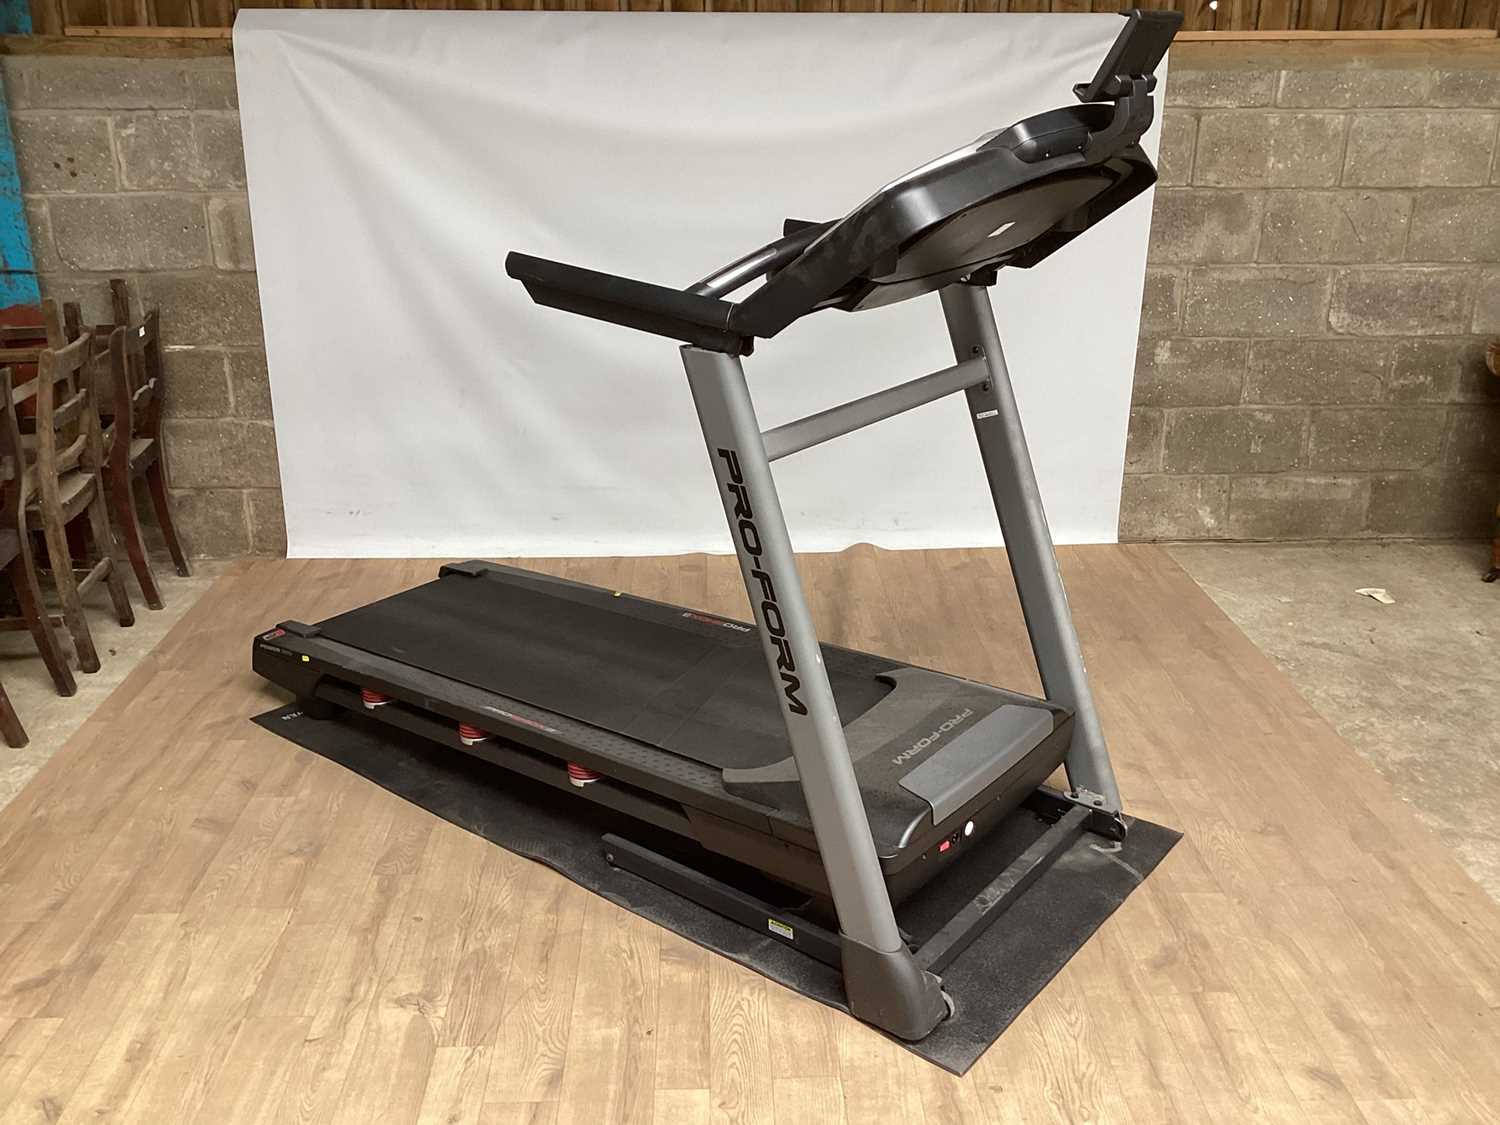 Lot 6 - Pro-form Shox3 running machine, as new with instructions